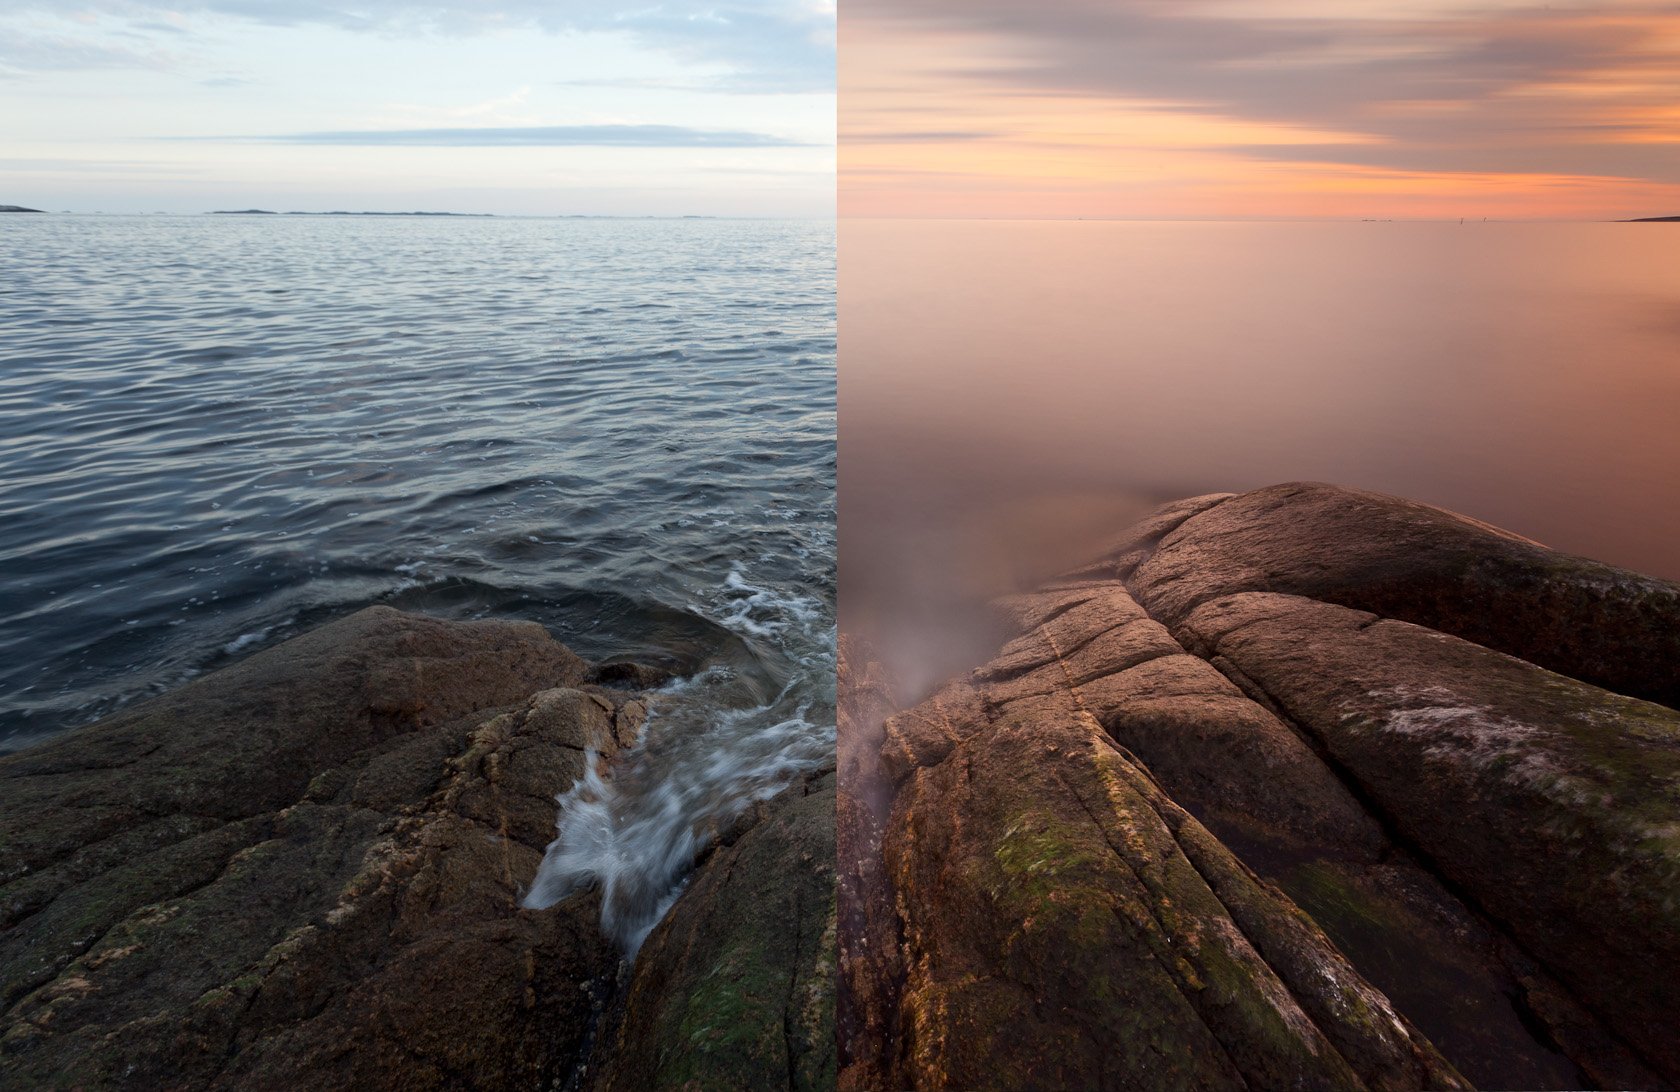 To illustrate the difference of a 10 stop ND filter, I made this image, consisting of a normal exposure (on the left) and an exposure with a 10 stop ND filter (right). Shooting with very heavy ND filters is challenging, but as you can see, the effects can be mesmerizing. Waves are smoothed out, splashed become mist, the light takes on a different character, and in the case of my B+W ND, I get a warm, pinkish tone. Settings. Before: 1/20 sec, f/8, ISO 200 After: 239 sec (4 minutes), f/16, ISO 200